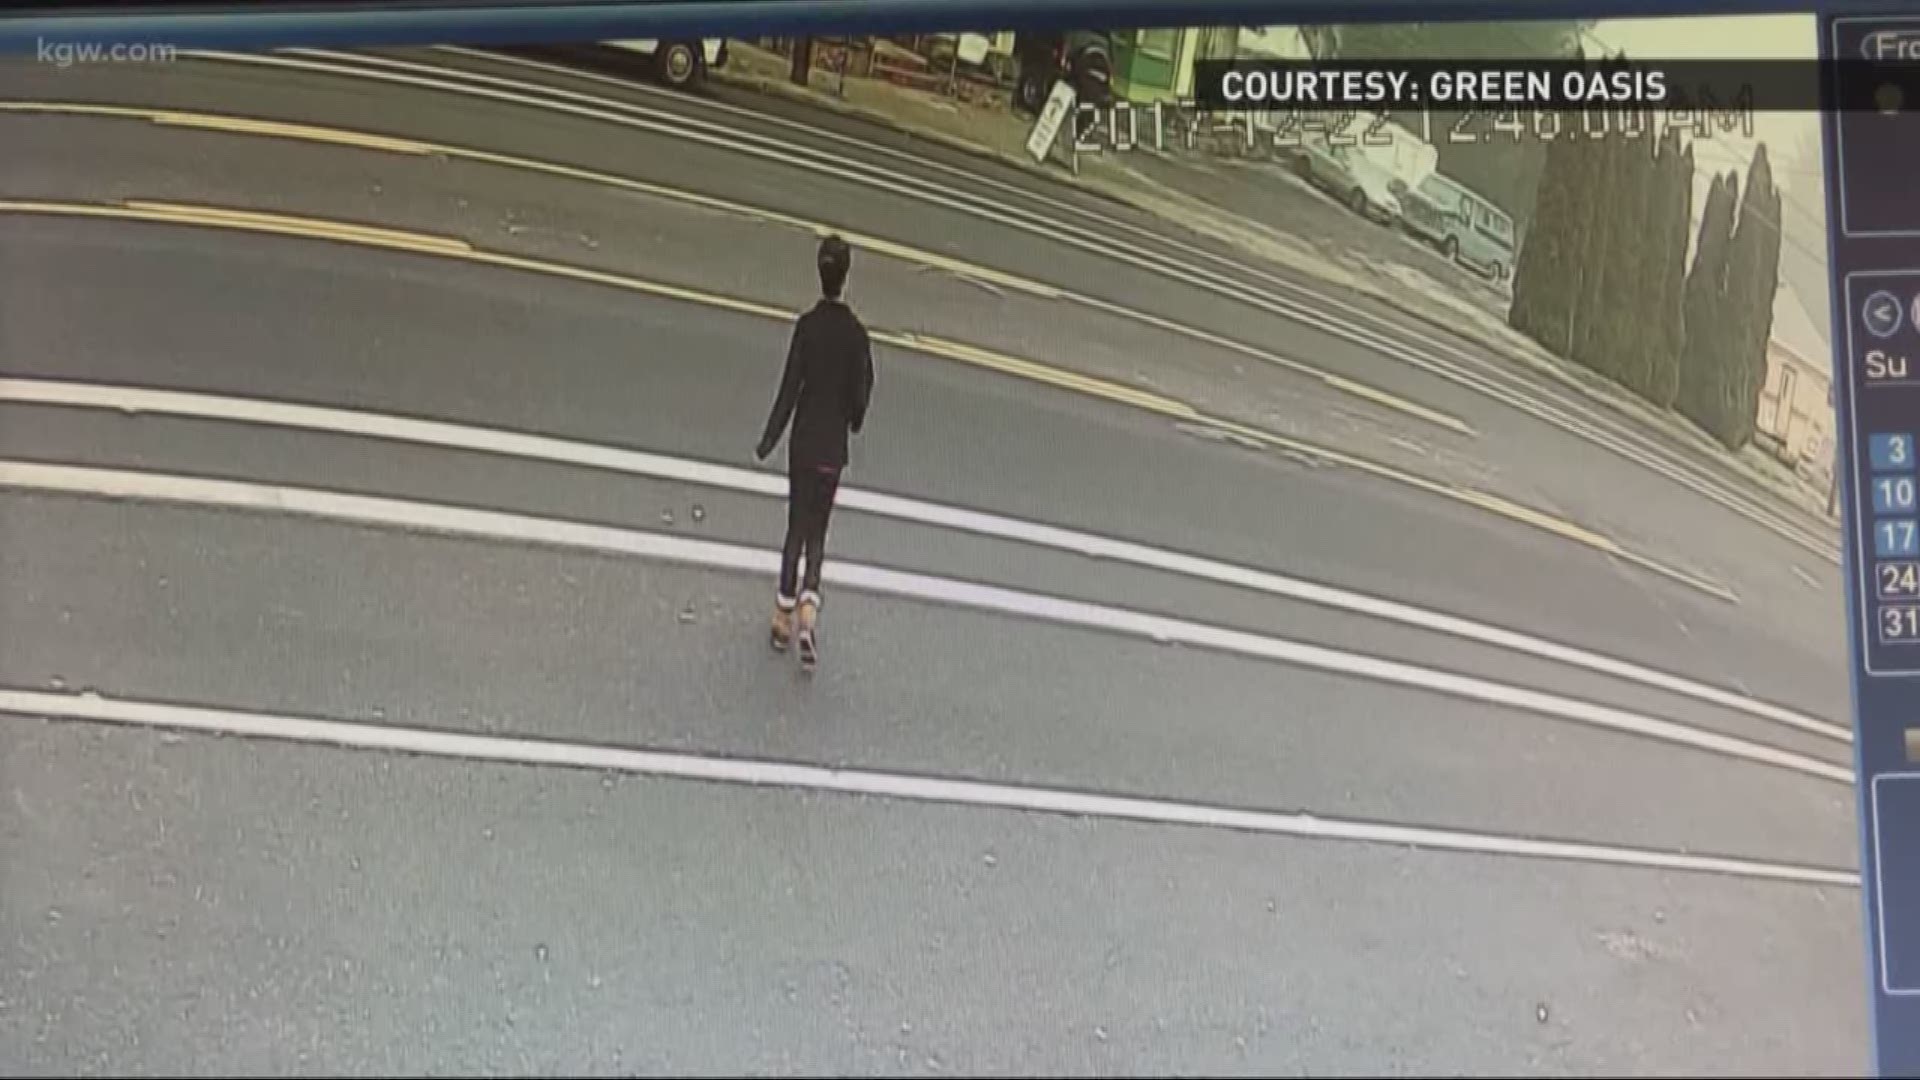 Video cameras show a Northeast Portland woman get critically injured in a hit-and-run